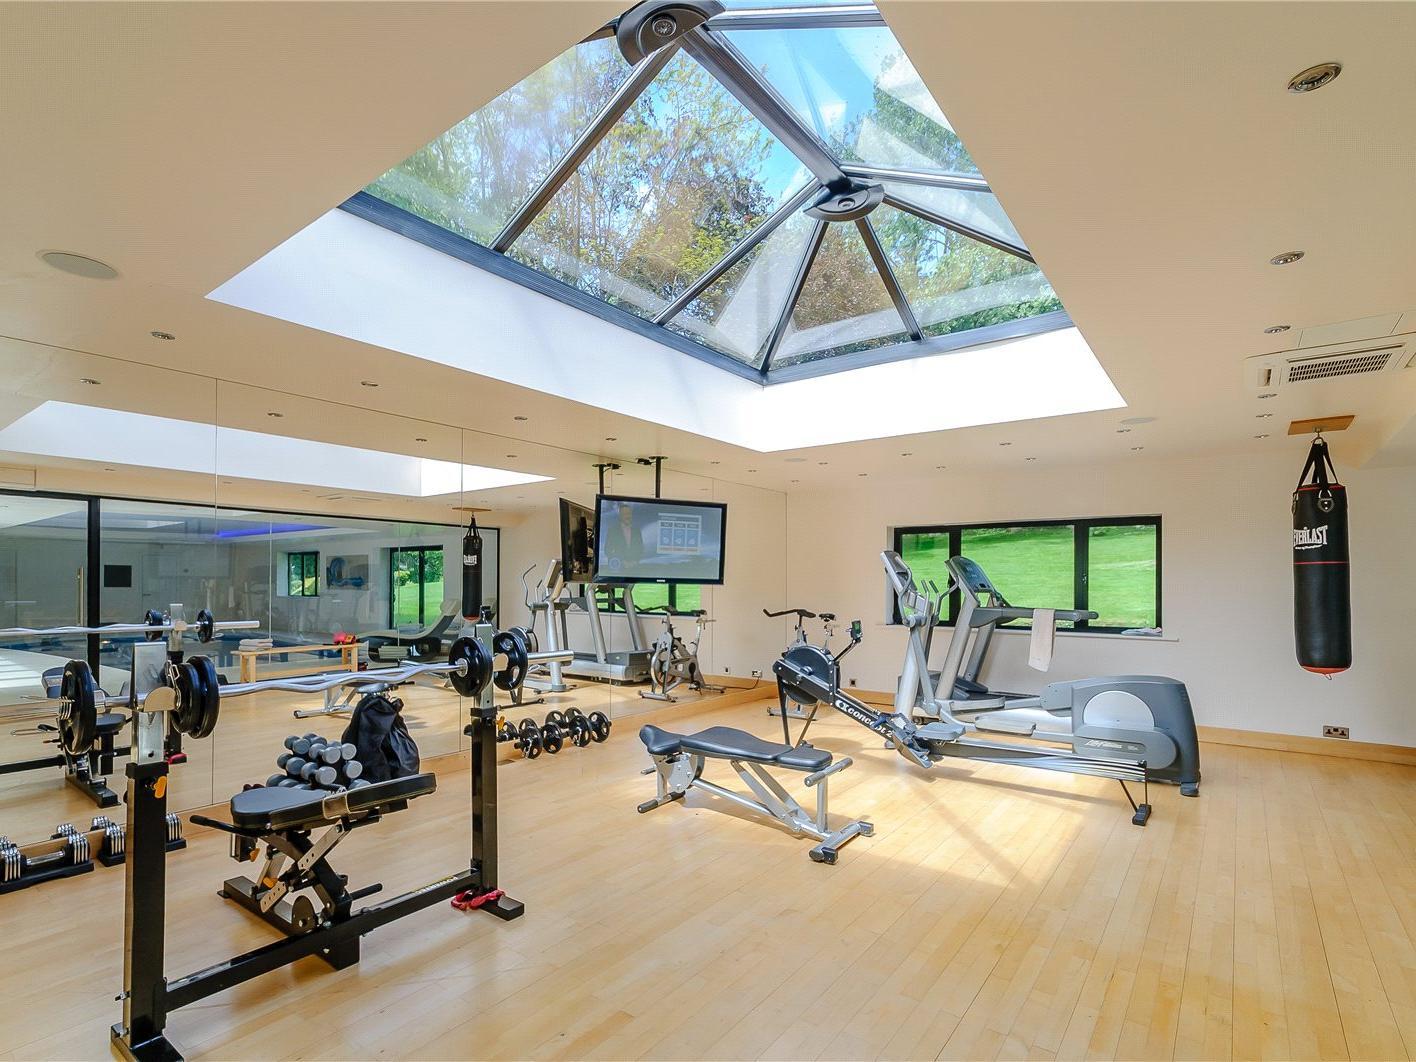 The gym features a lantern ceiling and is fitted with air conditioning.